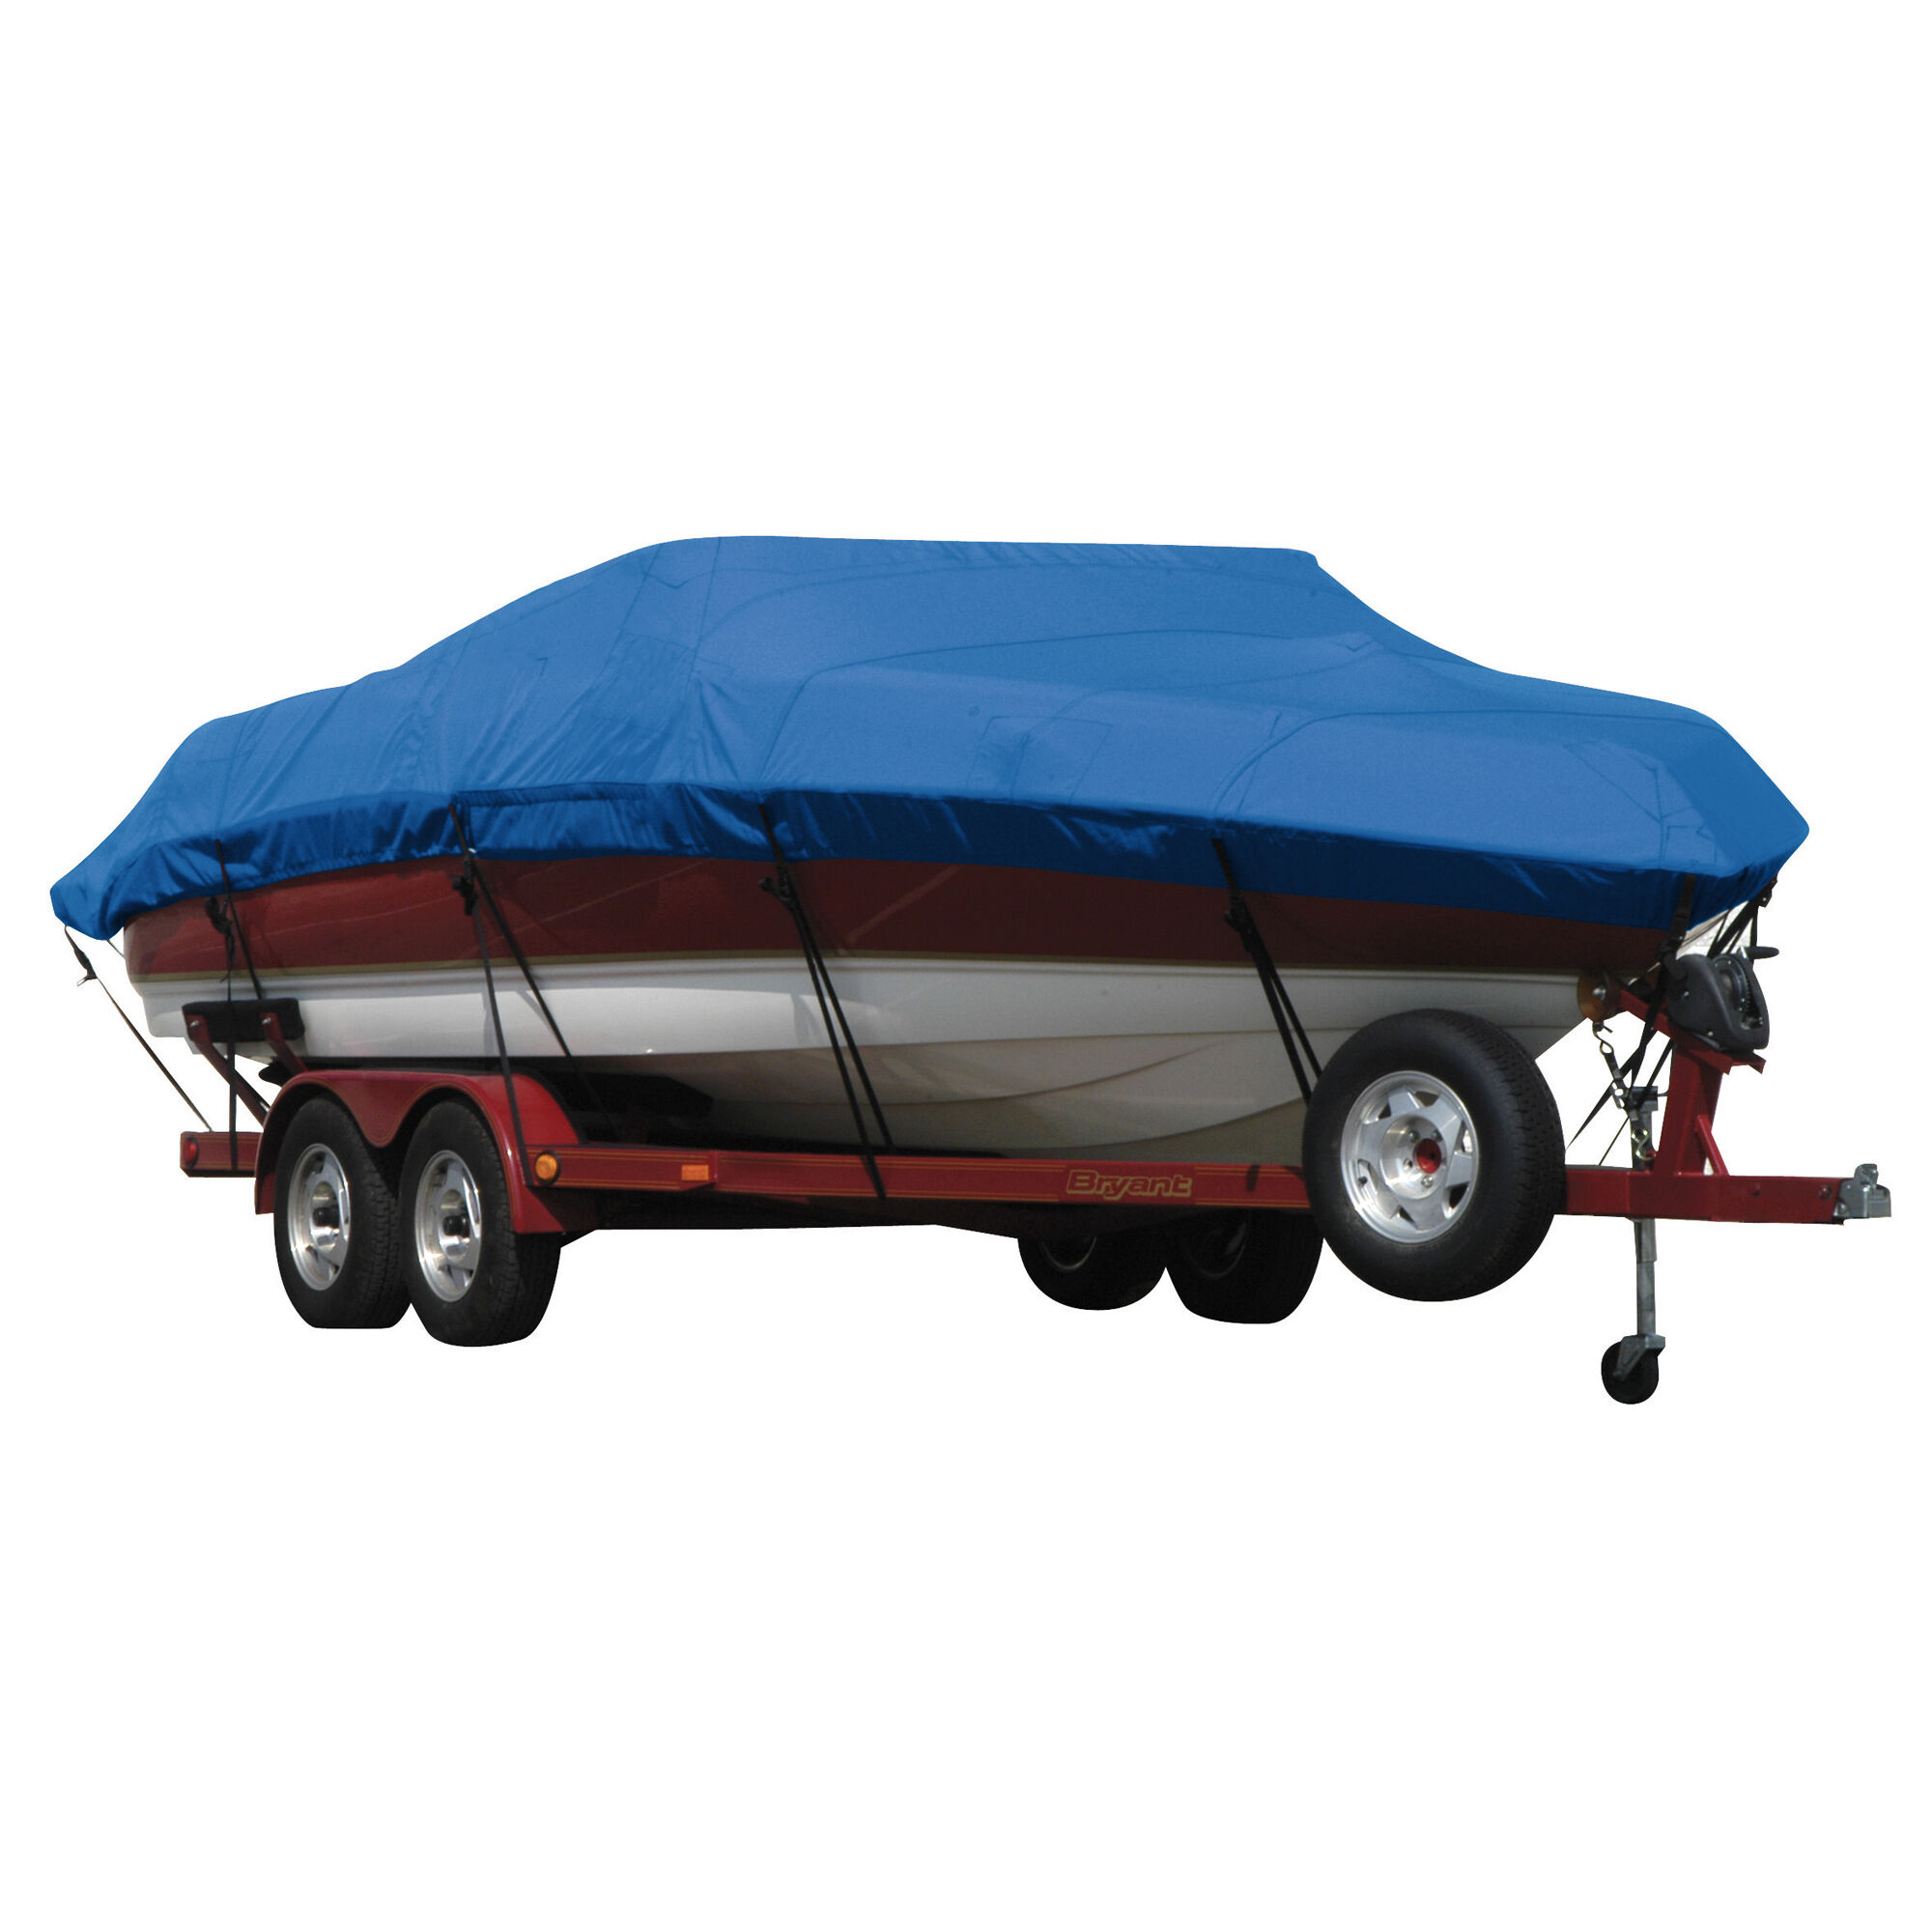 Covermate Exact Fit Sunbrella Boat Cover for Bayliner Classic 2452 Cd Classic 2452 Cd Hard Top I/O. Pacific Blue